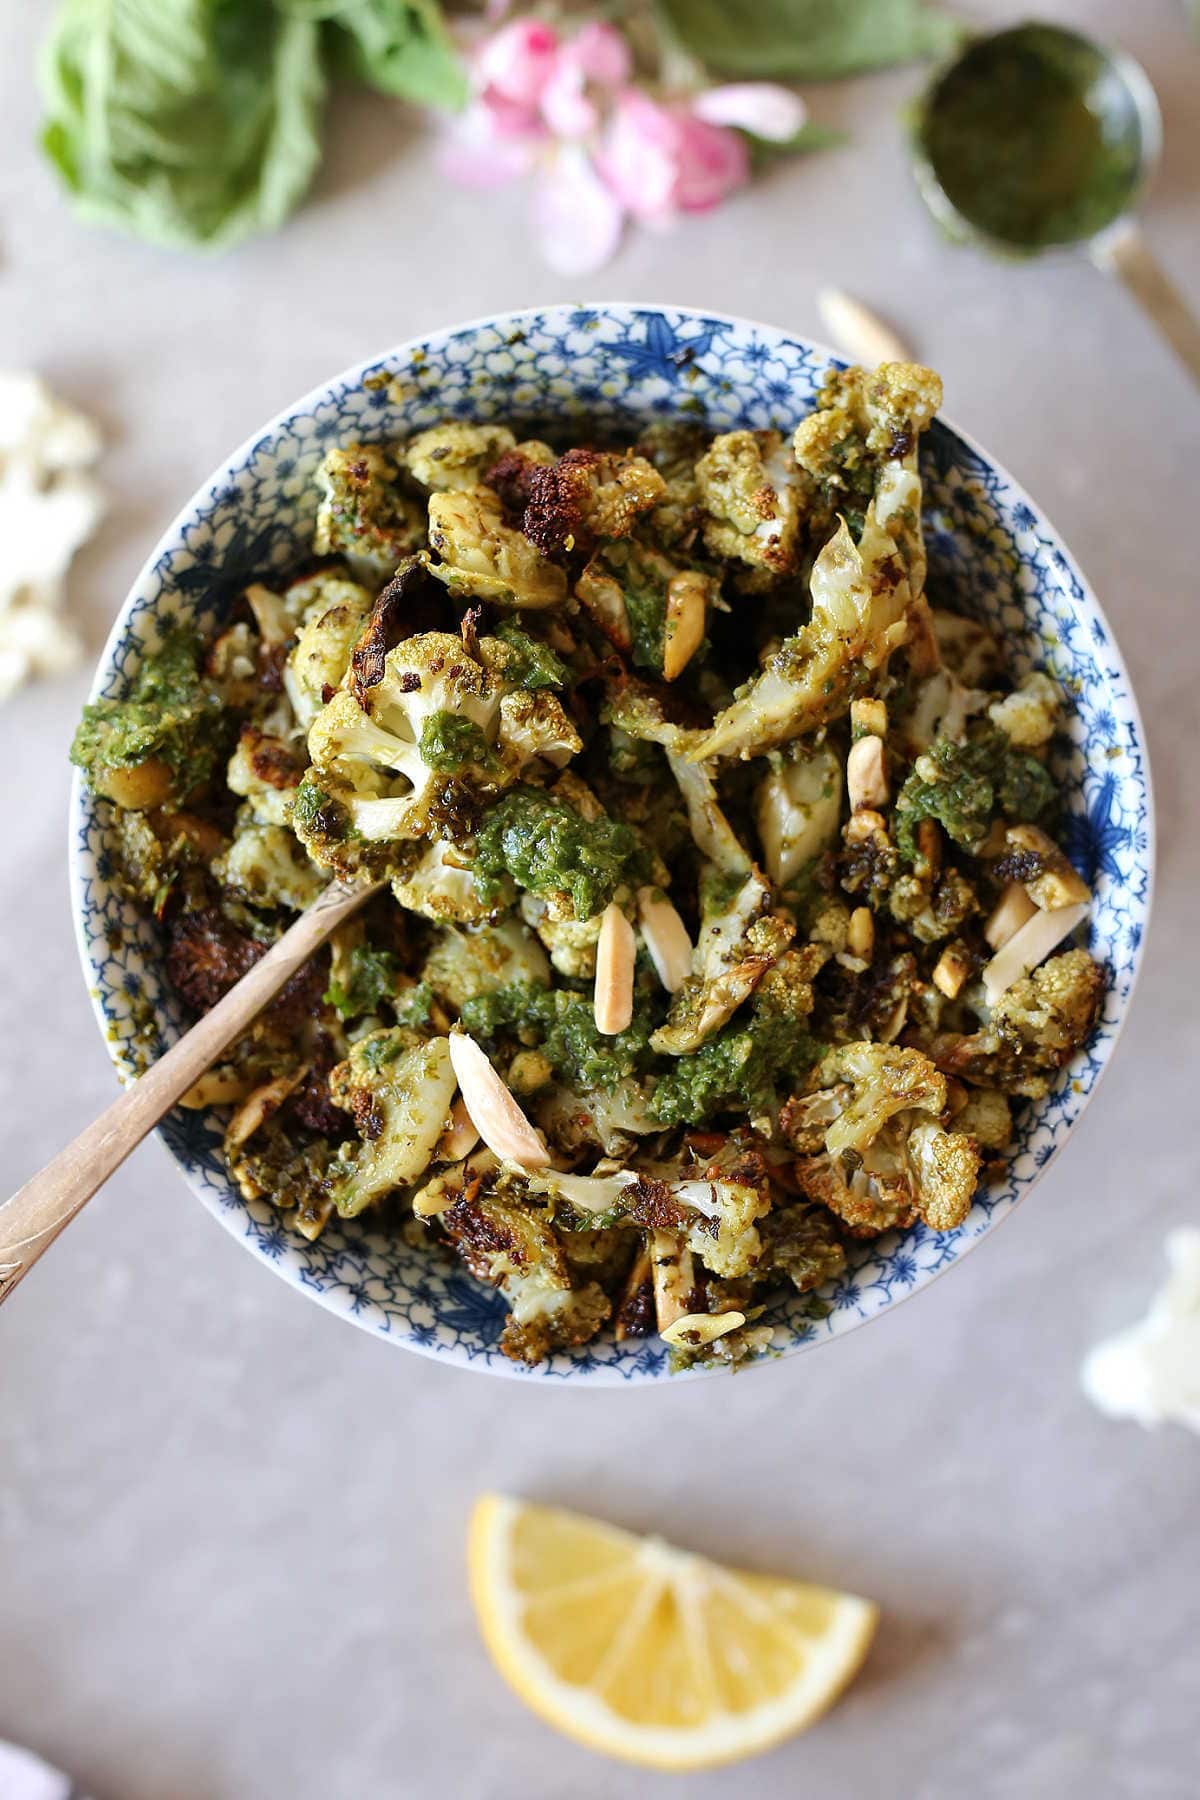 Roasted Cauliflower tossed with fragrant almond pesto and topped with crunchy toasted almond slivers will be your new favorite side dish! It is plant based, nourishing and made with vegan gluten-free ingredients. #sheetpan #easy #healthy #cauliflower #pesto #roasted #recipe #side #healthy | delightfulmomfood.com